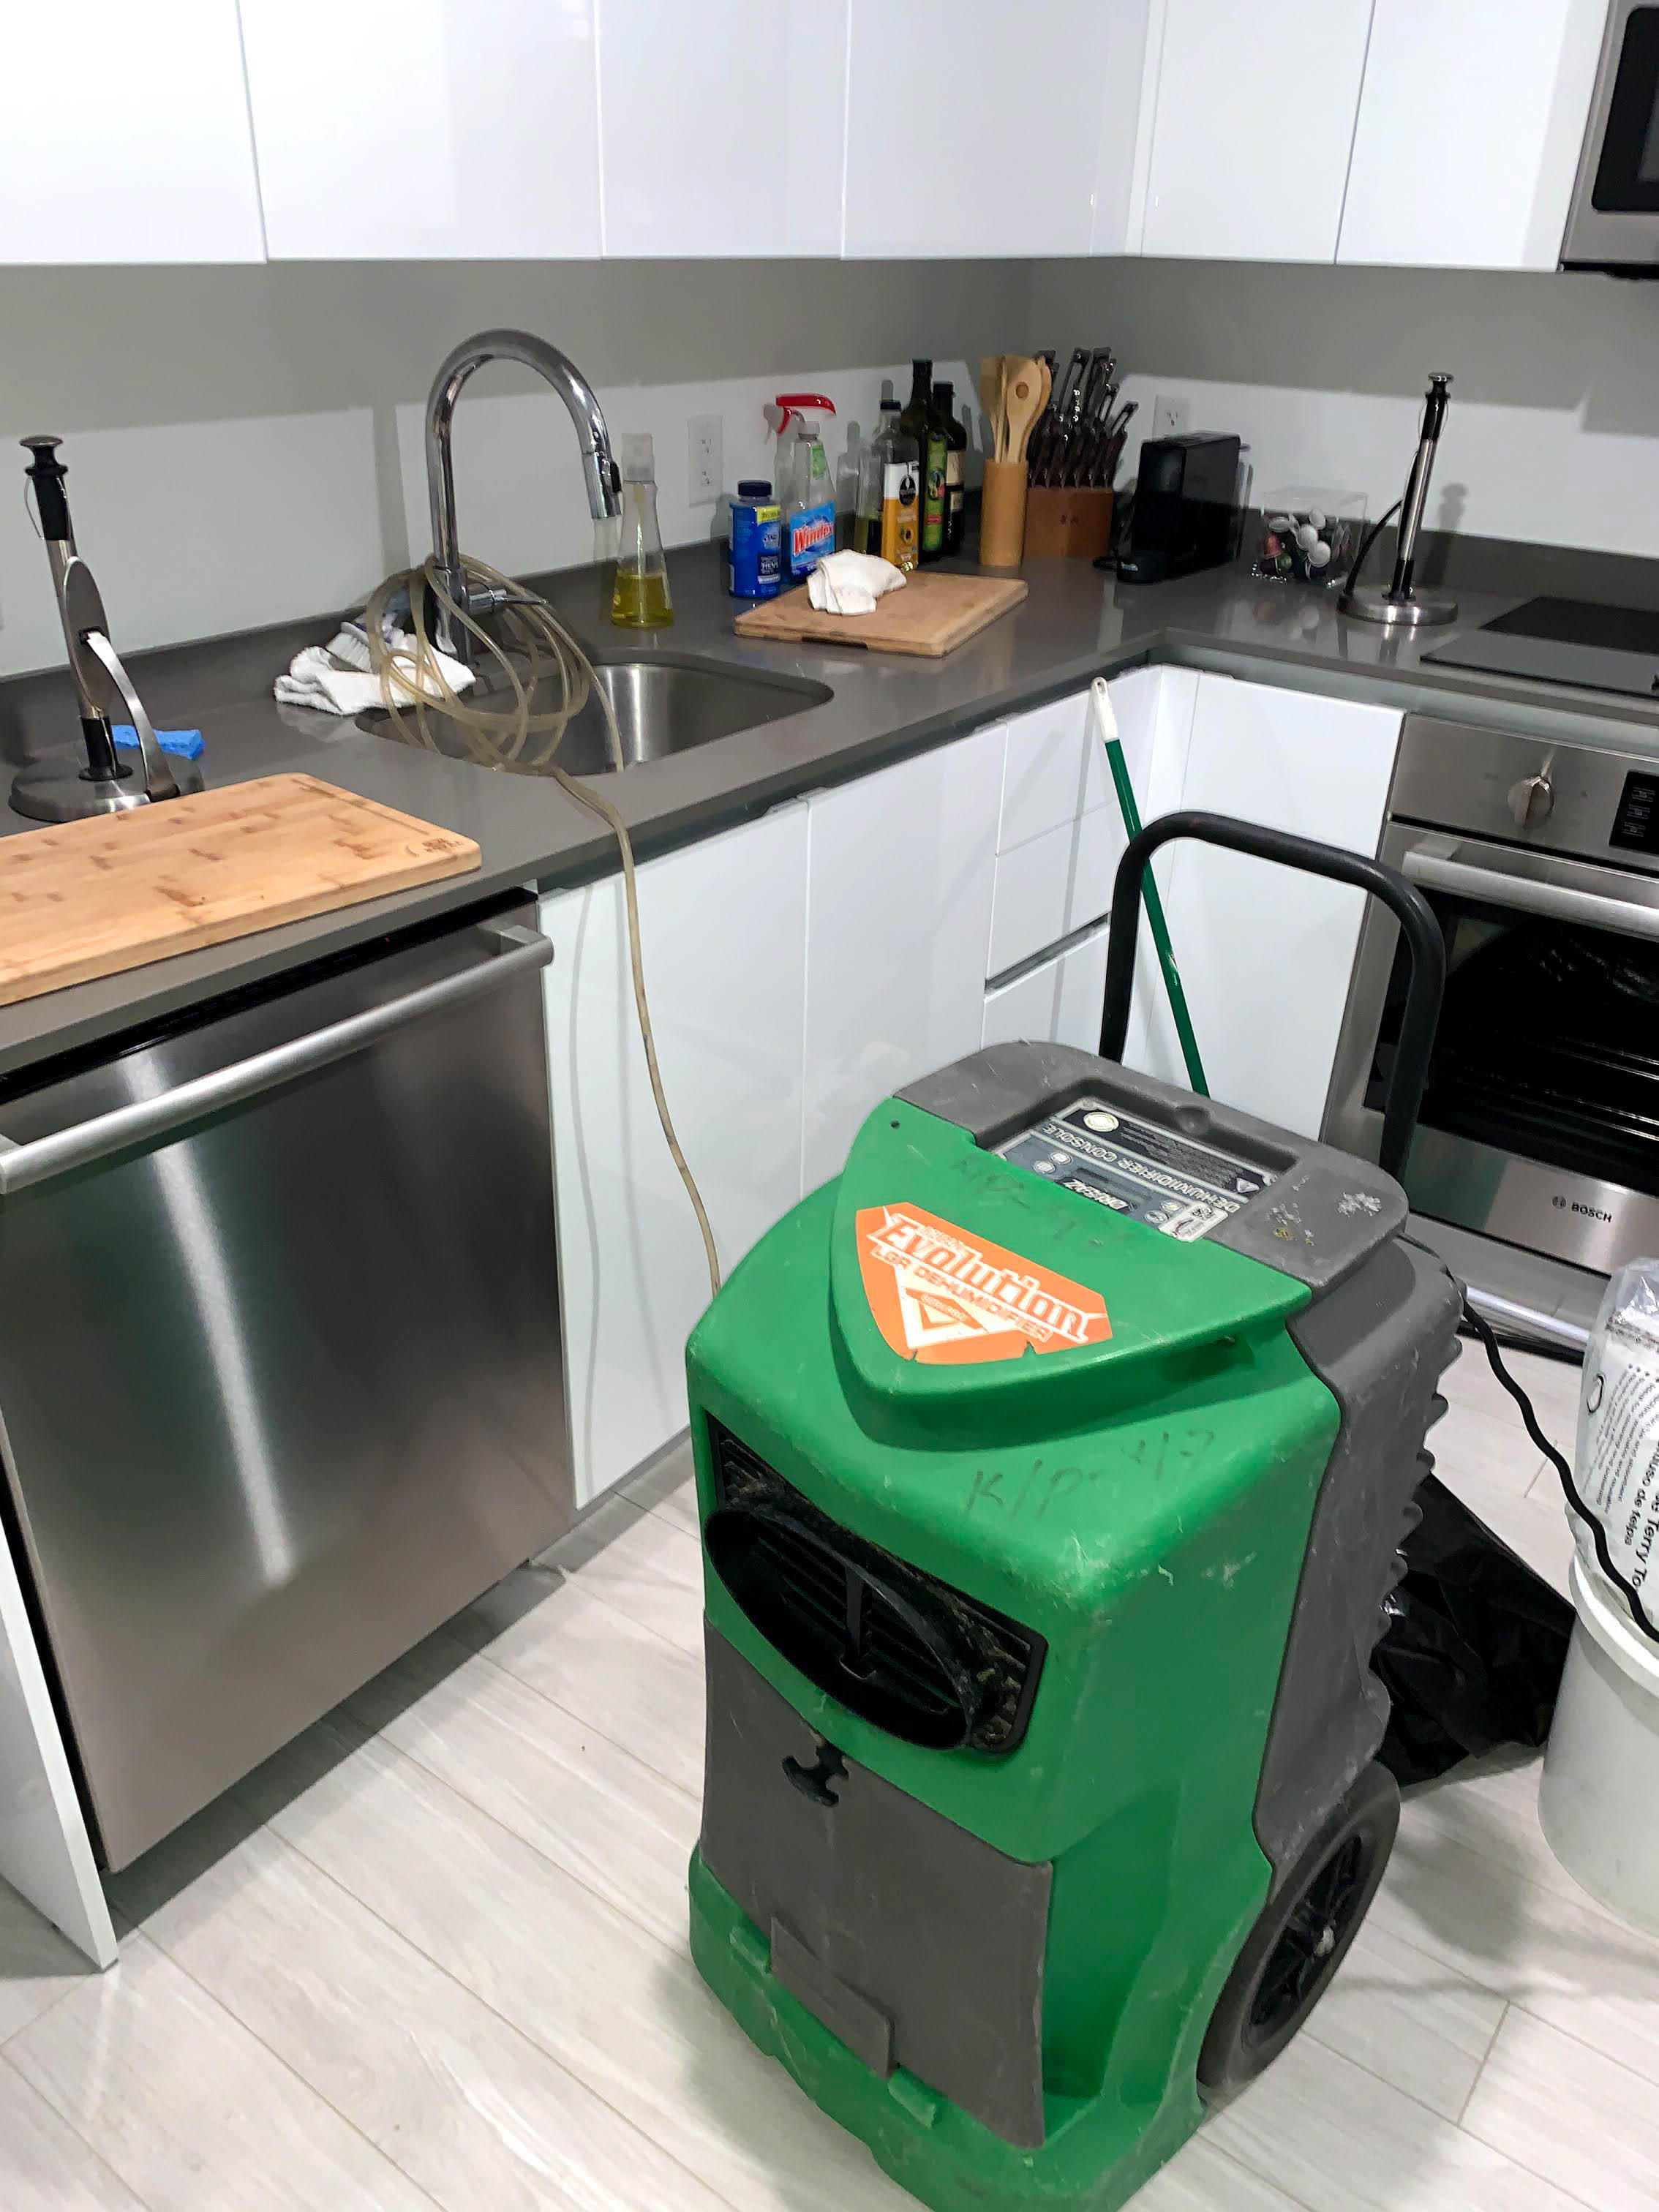 If a dishwasher causes a leak in your home or business, SERVPRO of Brickell is available to extract the water and repair the damage.